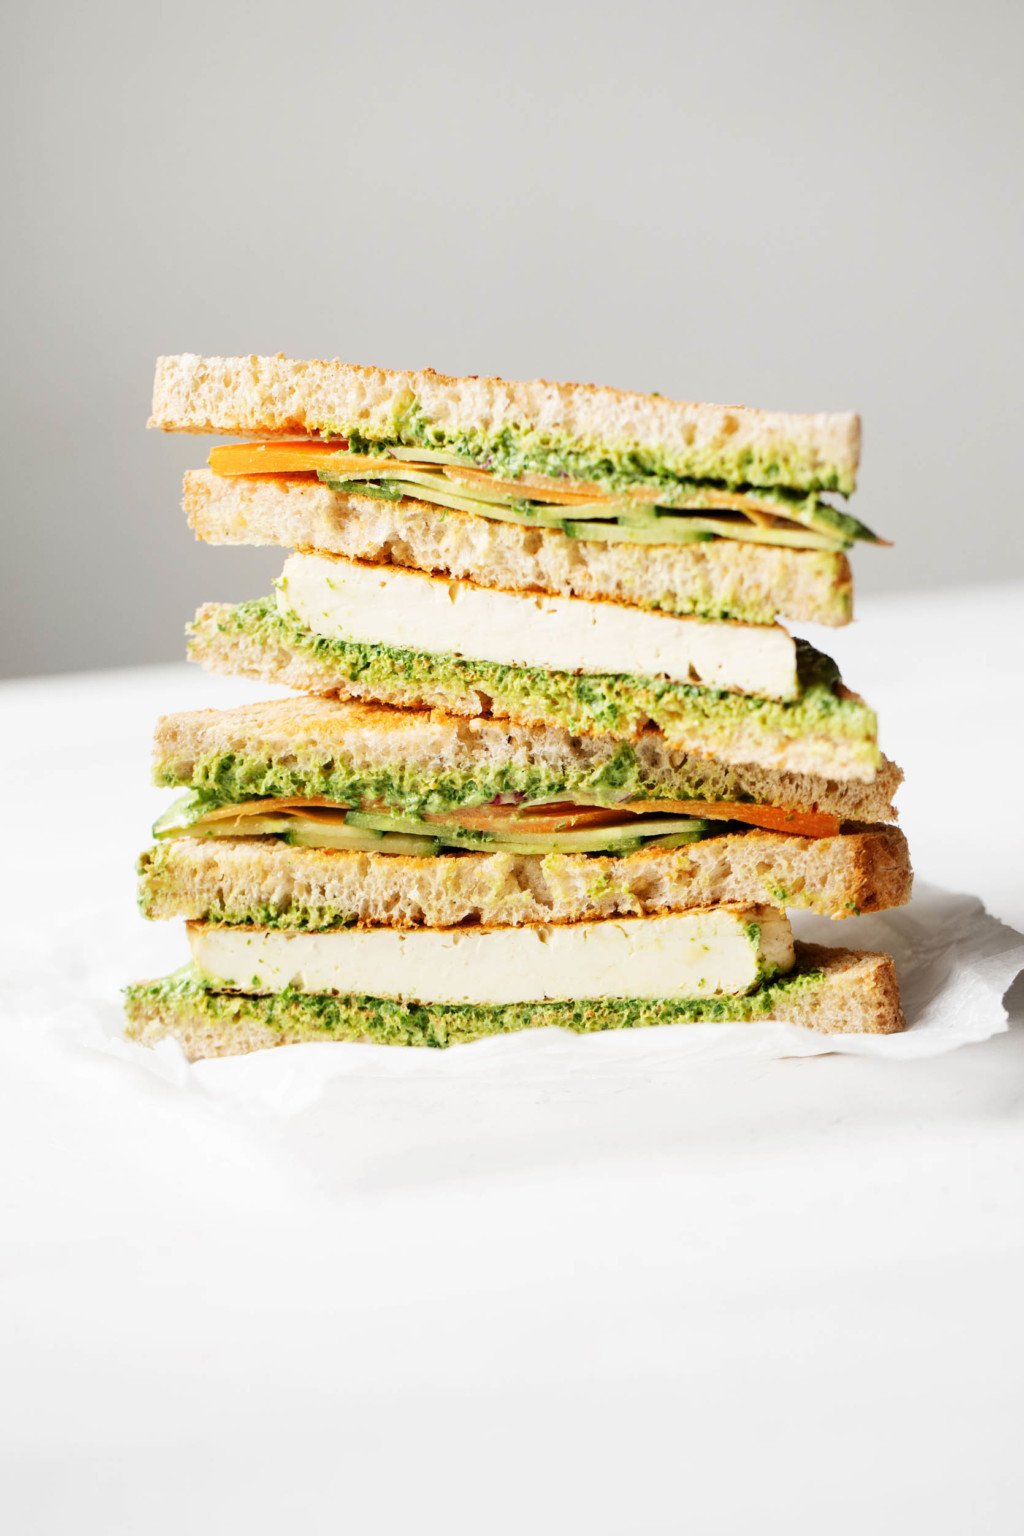 A vegan club sandwich has been sliced in half and stacked. It's filled with grilled tofu and a green sauce.